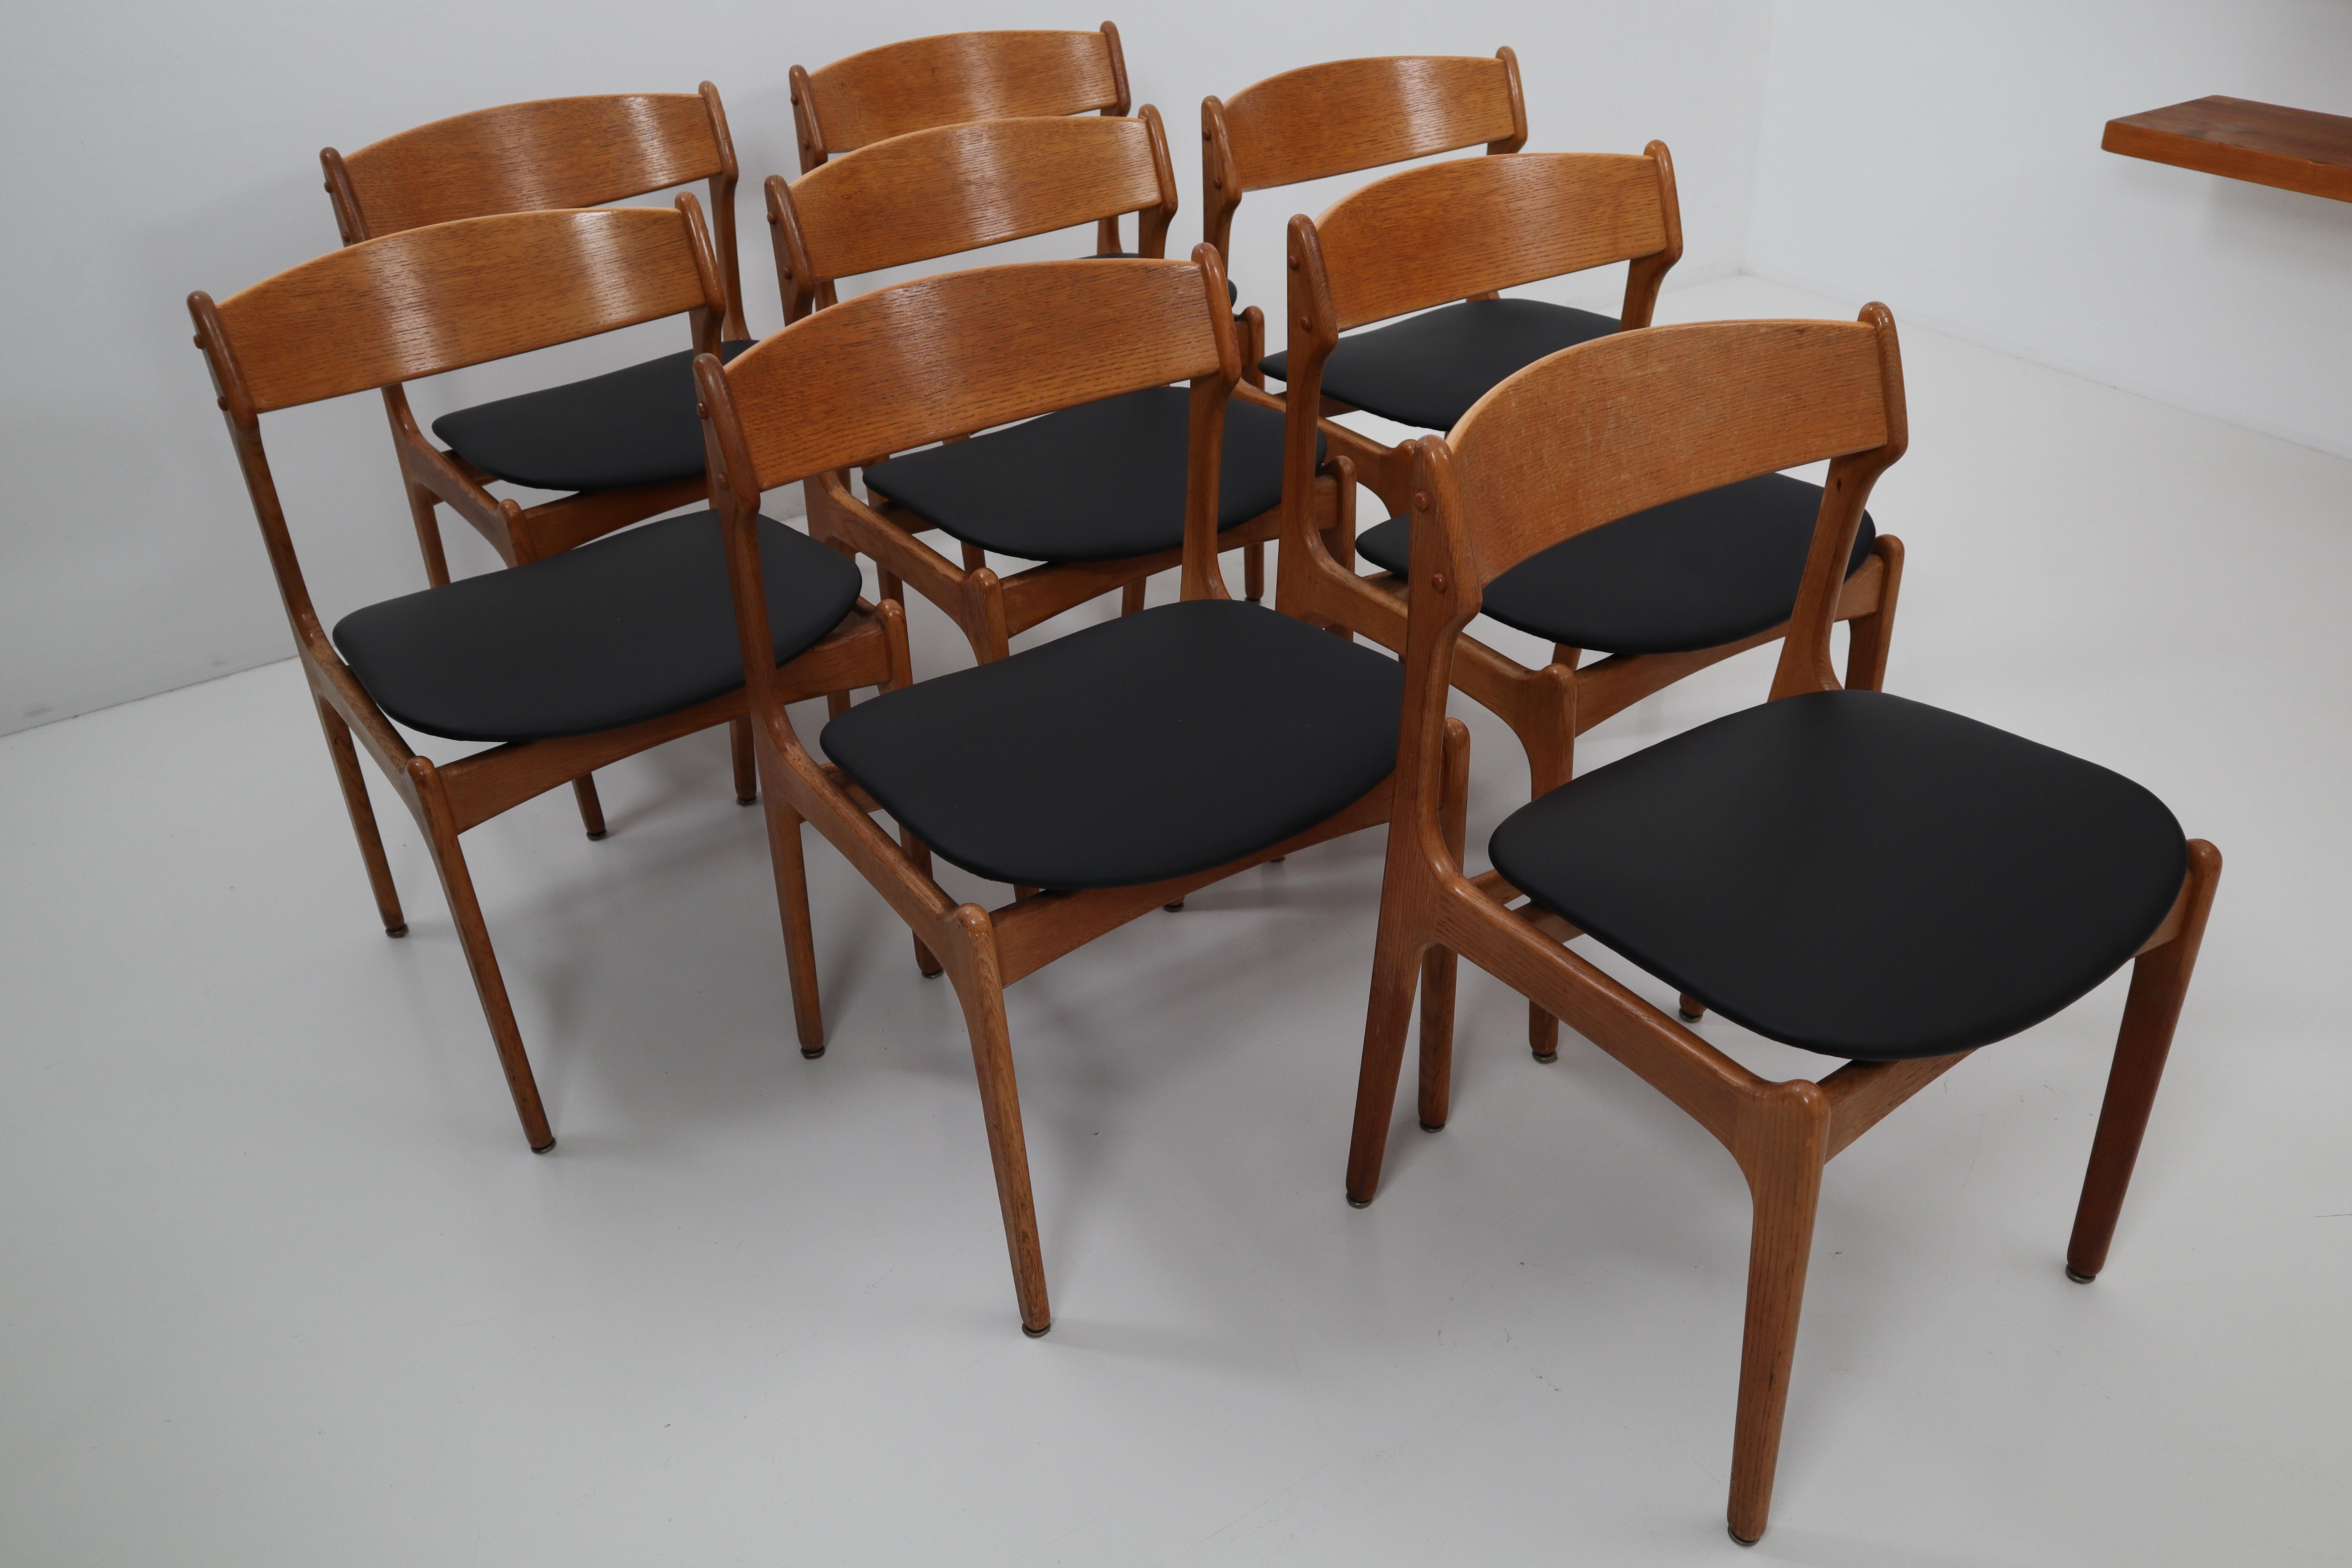 Set of eight dining room chairs designed by Erik Buck, Denmark and produced by O. D. Mobler. The seat frame is made of solid oakwood, the seats are newly covered with matte black leather. The dining room chairs are labeled underneath. The dining